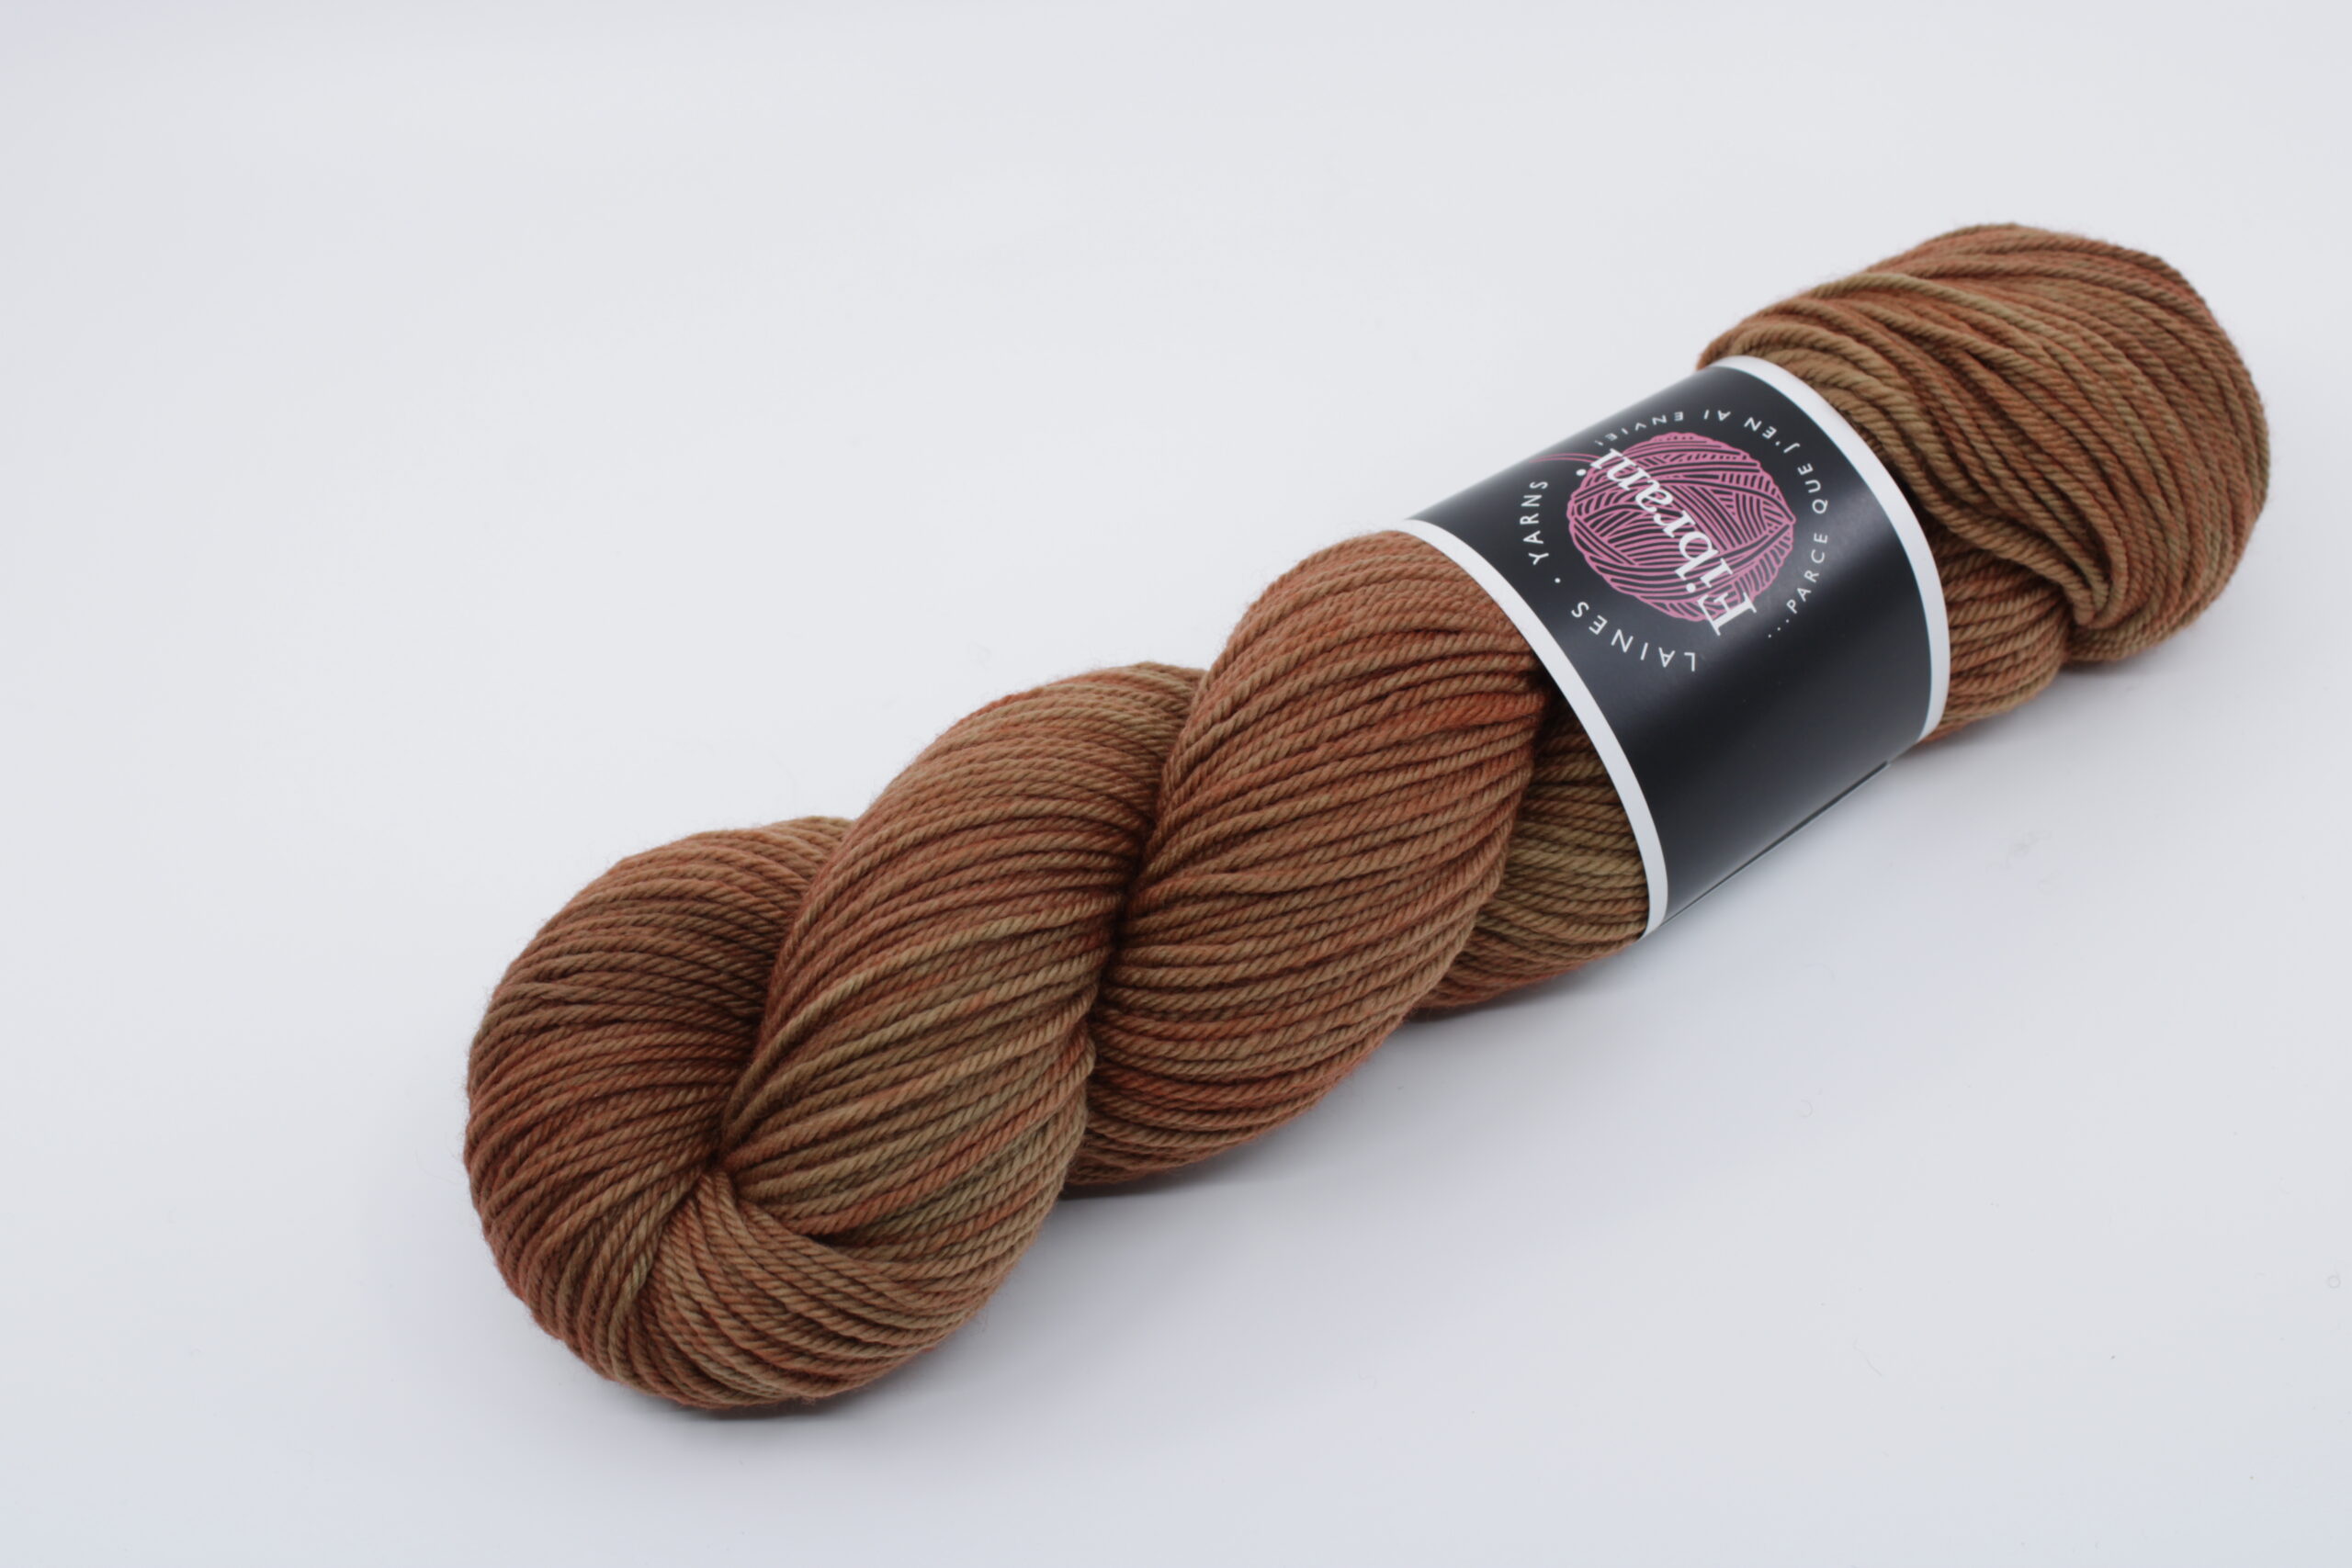 Folcon worsted base. Wool 100% untreated merino. Trio of colors: brown-red. Color: Lucas.